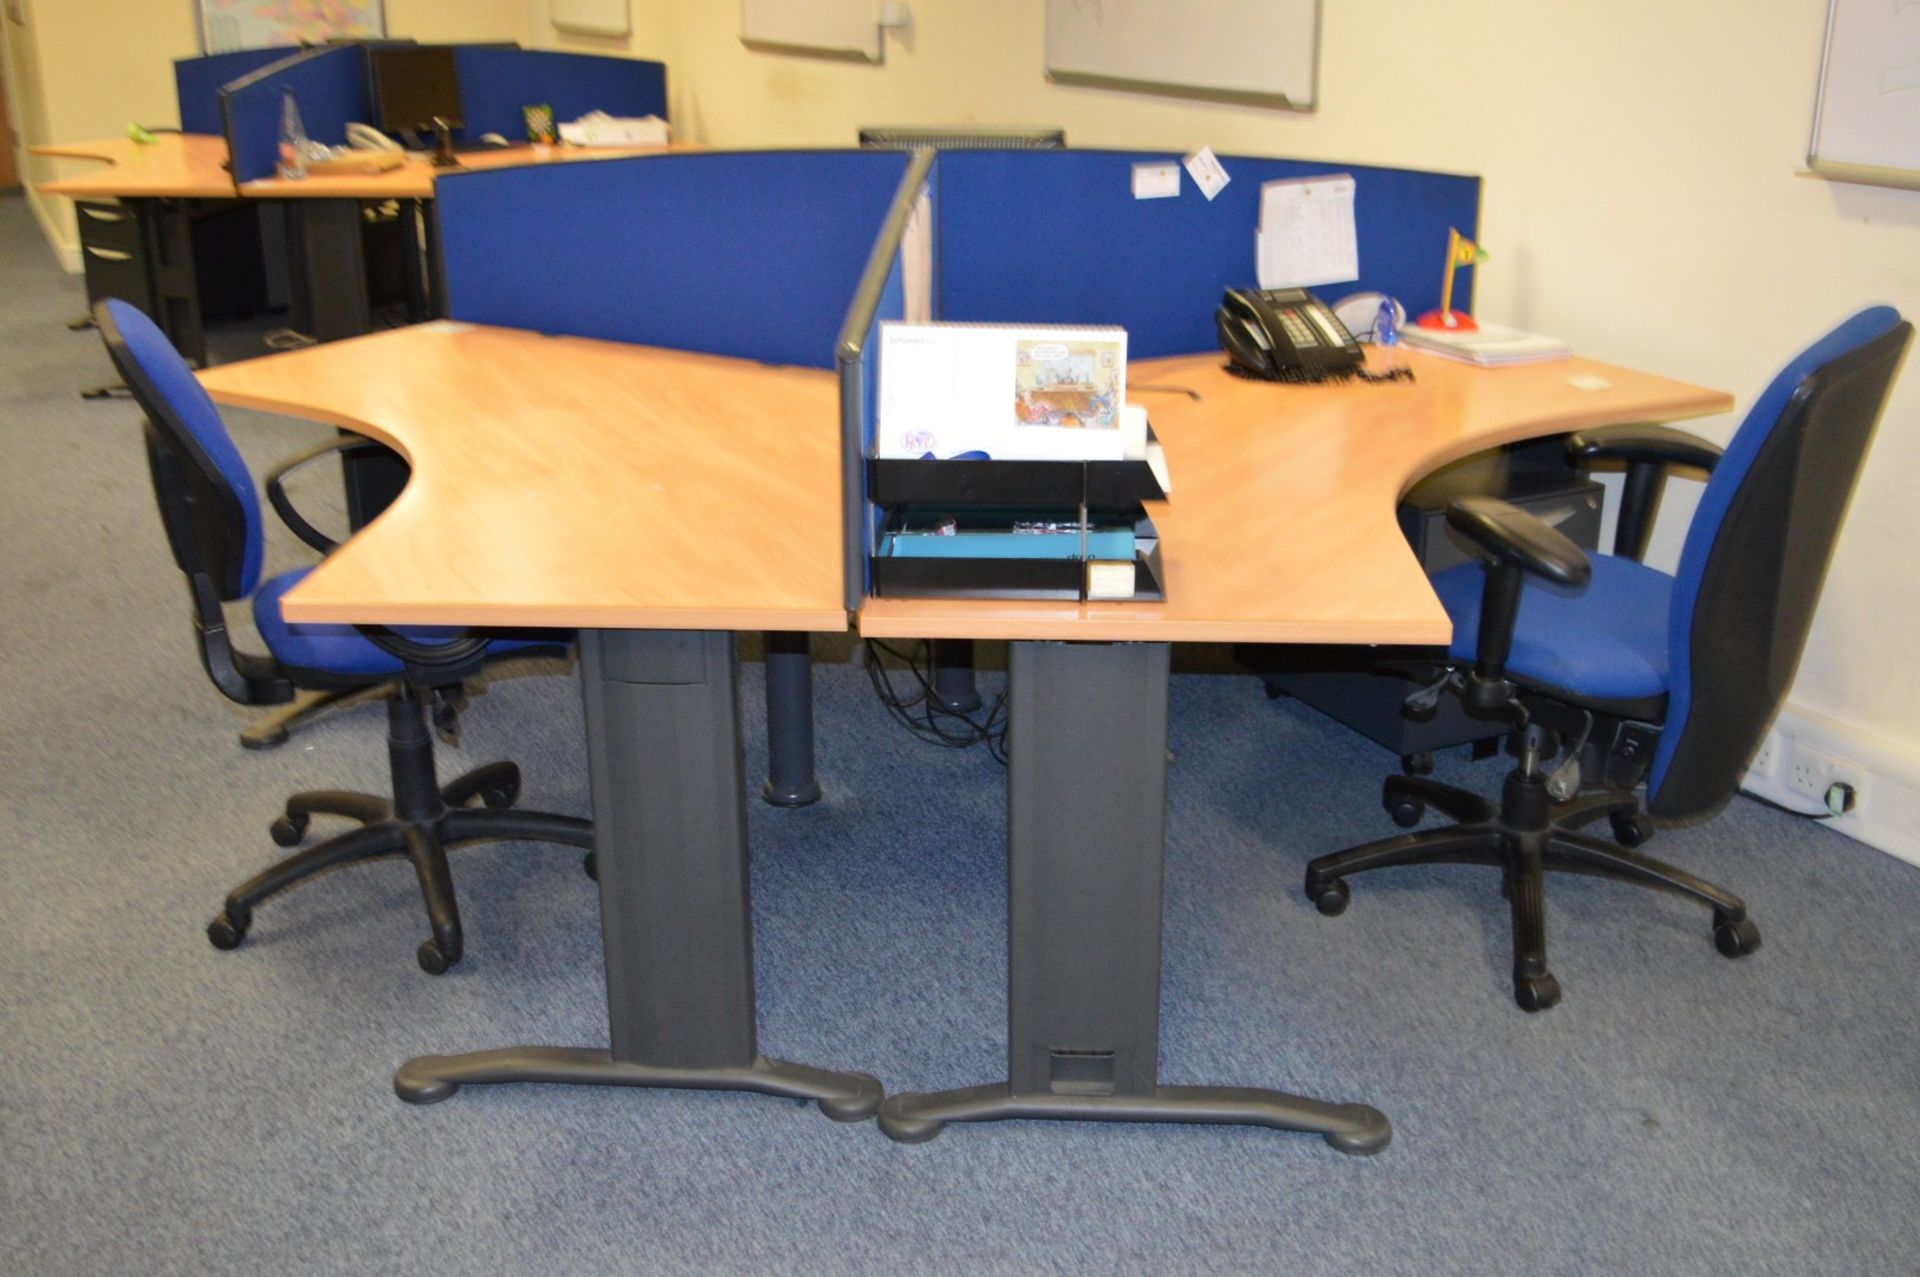 1 x Tripod Office Workstation Desk With Chairs - Suitable For 3 Users - Includes Three Premium - Image 3 of 6